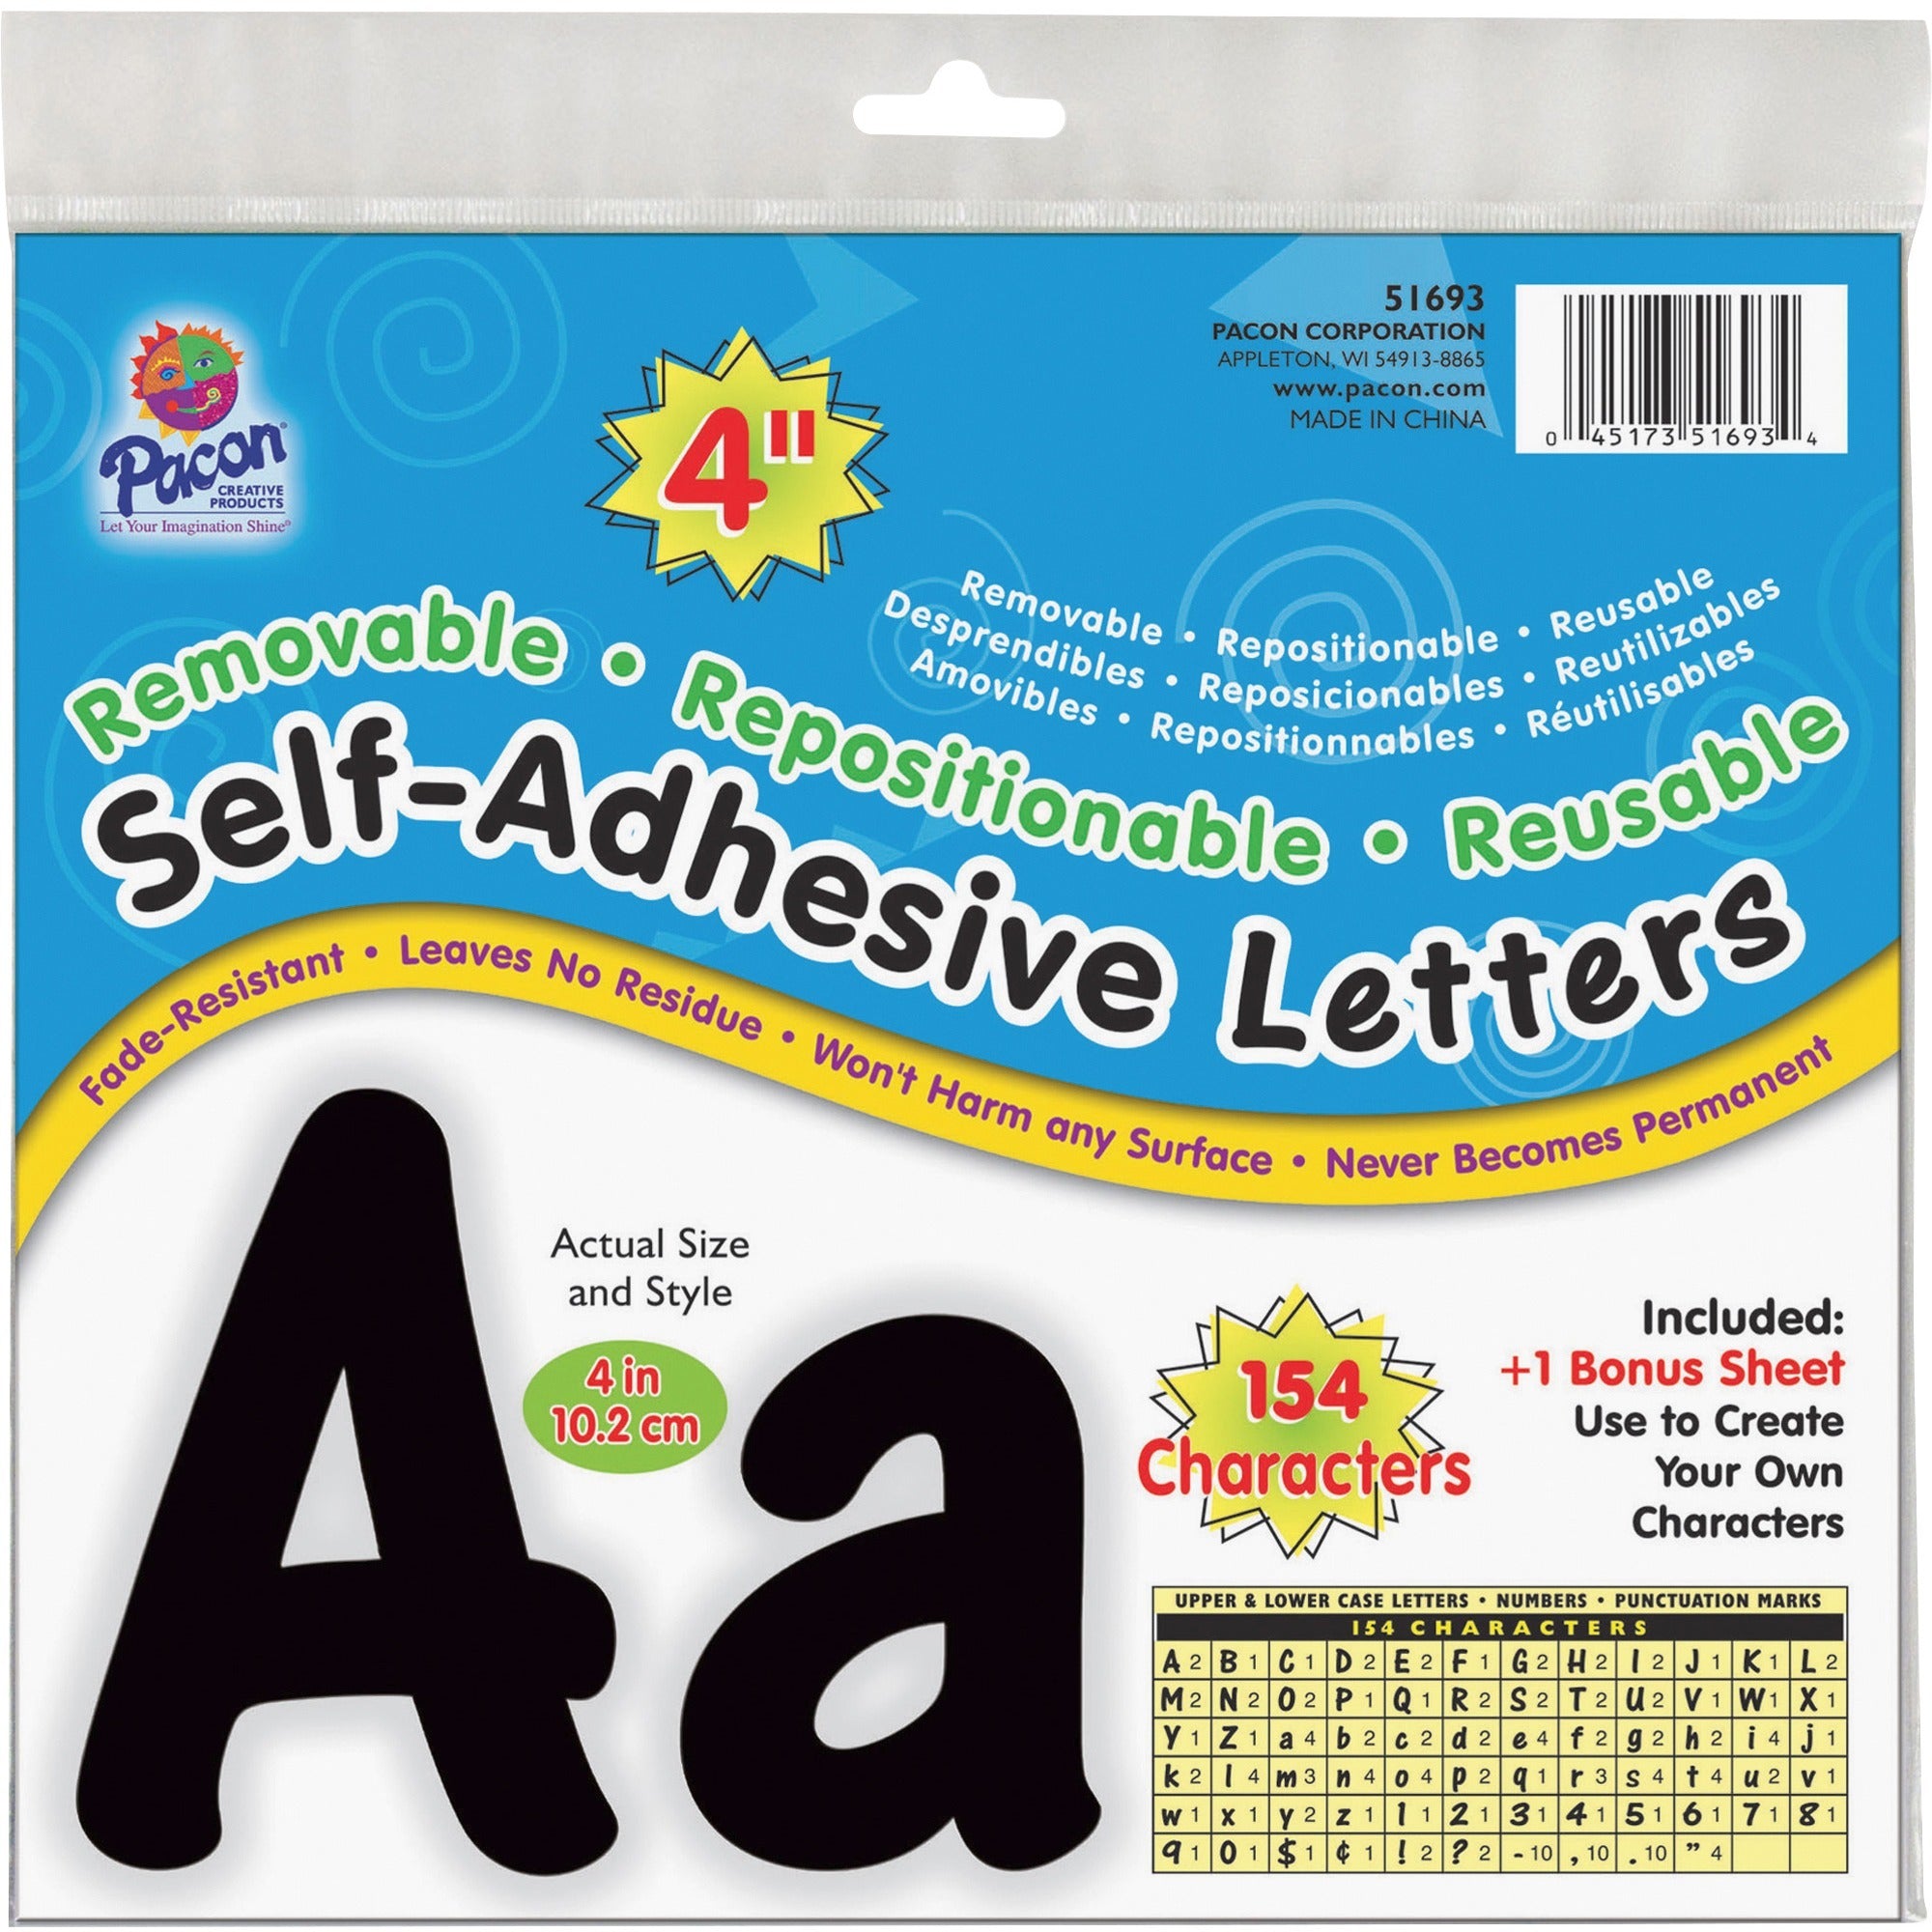 UCreate 154 Character Self-adhesive Letter Set - Uppercase Letters, Numbers, Punctuation Marks Shape - Self-adhesive, Removable, Repositionable, Reusable, Fade Resistant, Acid-free, Residue-free, Damage Resistant, Easy to Use - 4" Height x 9" Length